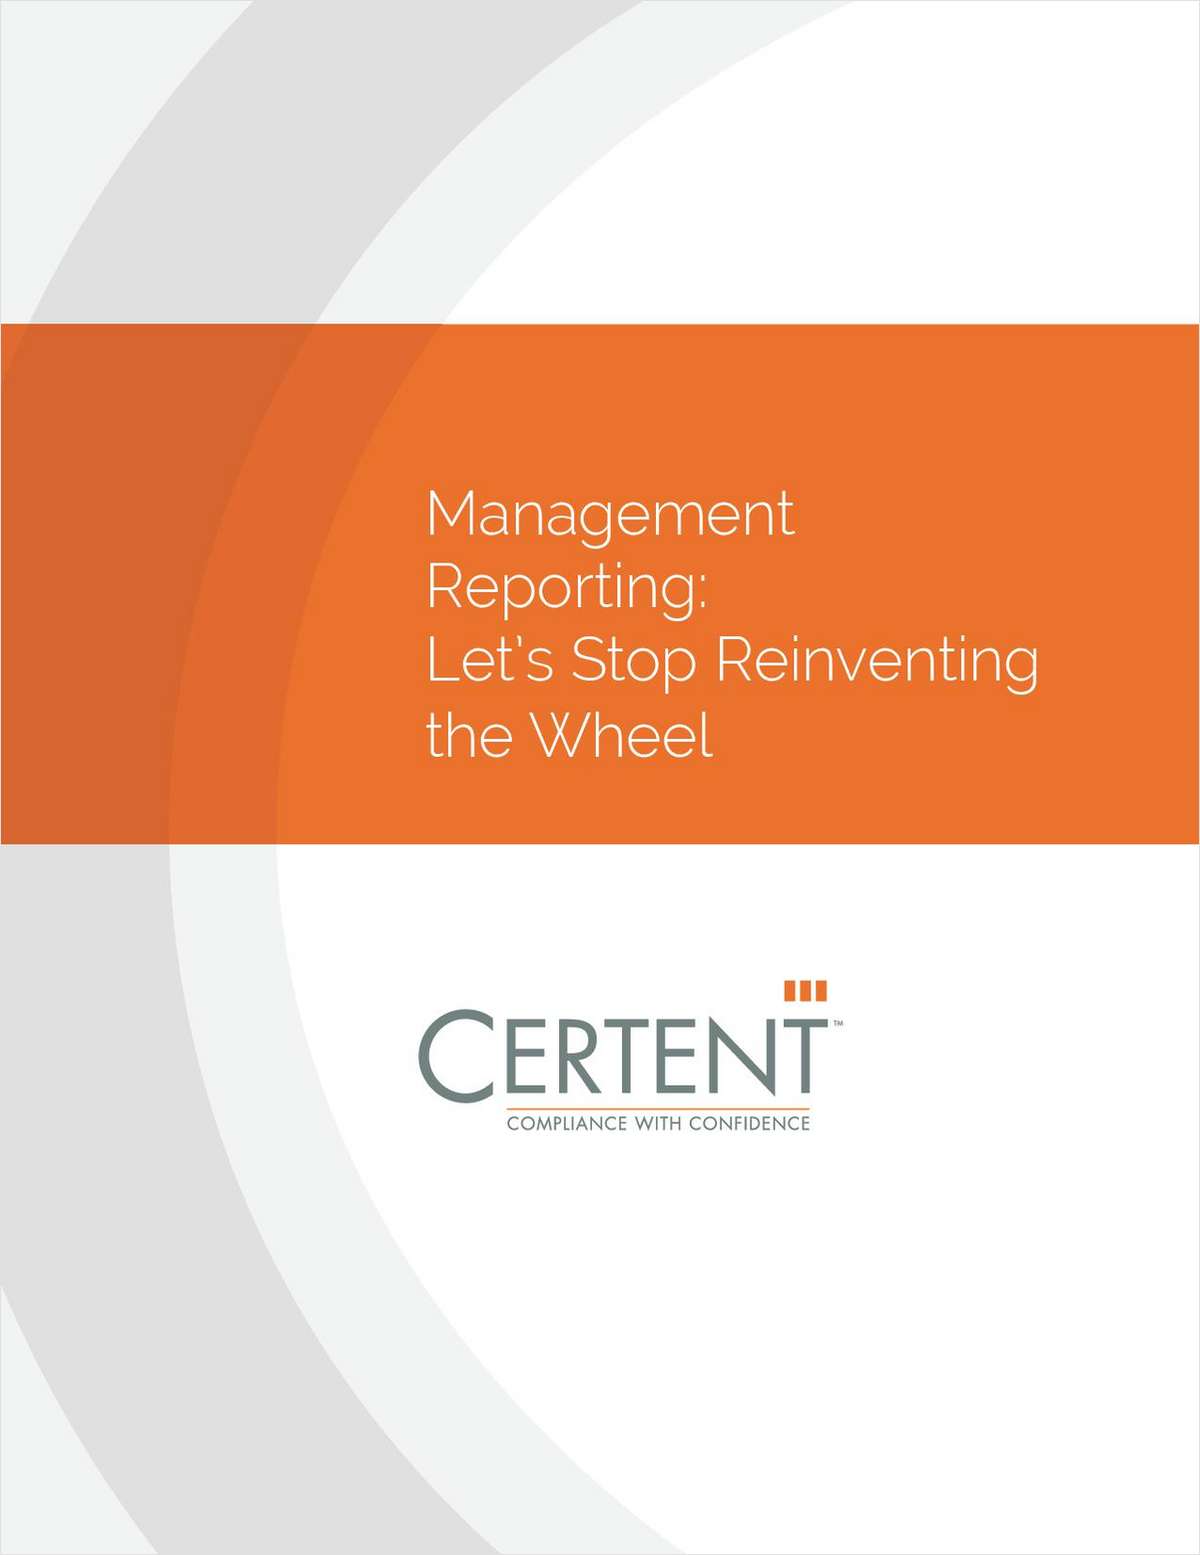 Management Reporting: Let's Stop Reinventing the Wheel